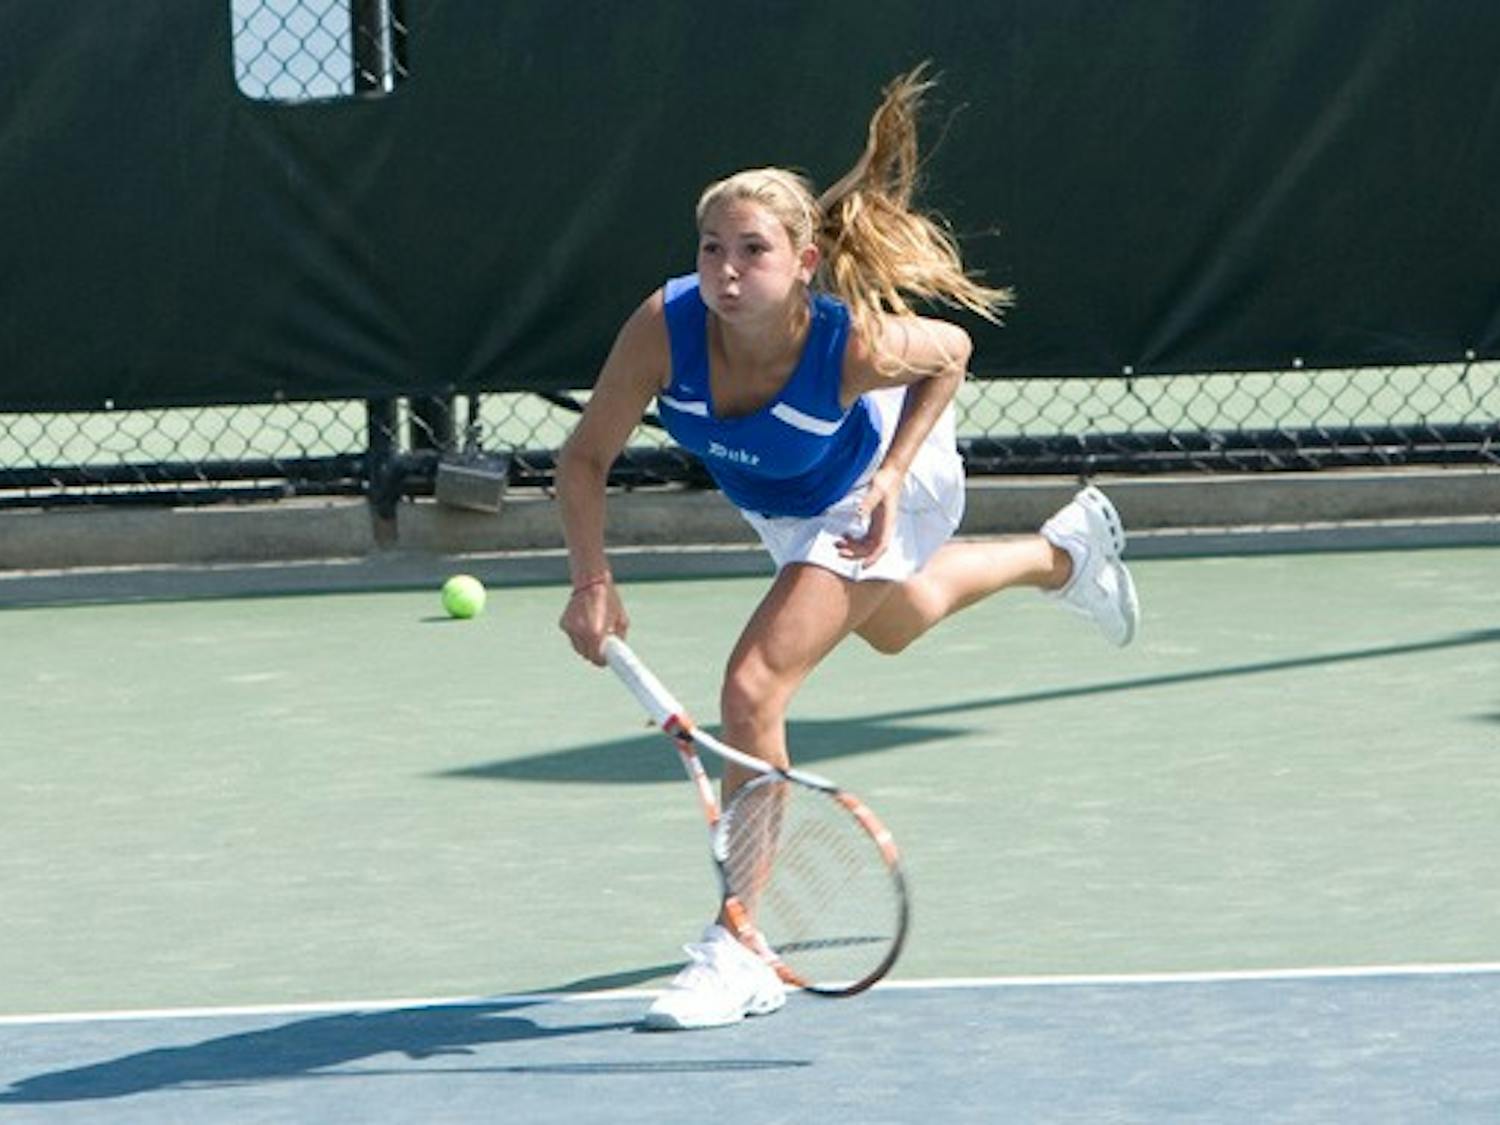 Mary Clayton qualified this summer to be one of the five Blue Devils competing next week in the ITA/Rivera All-American Championships.